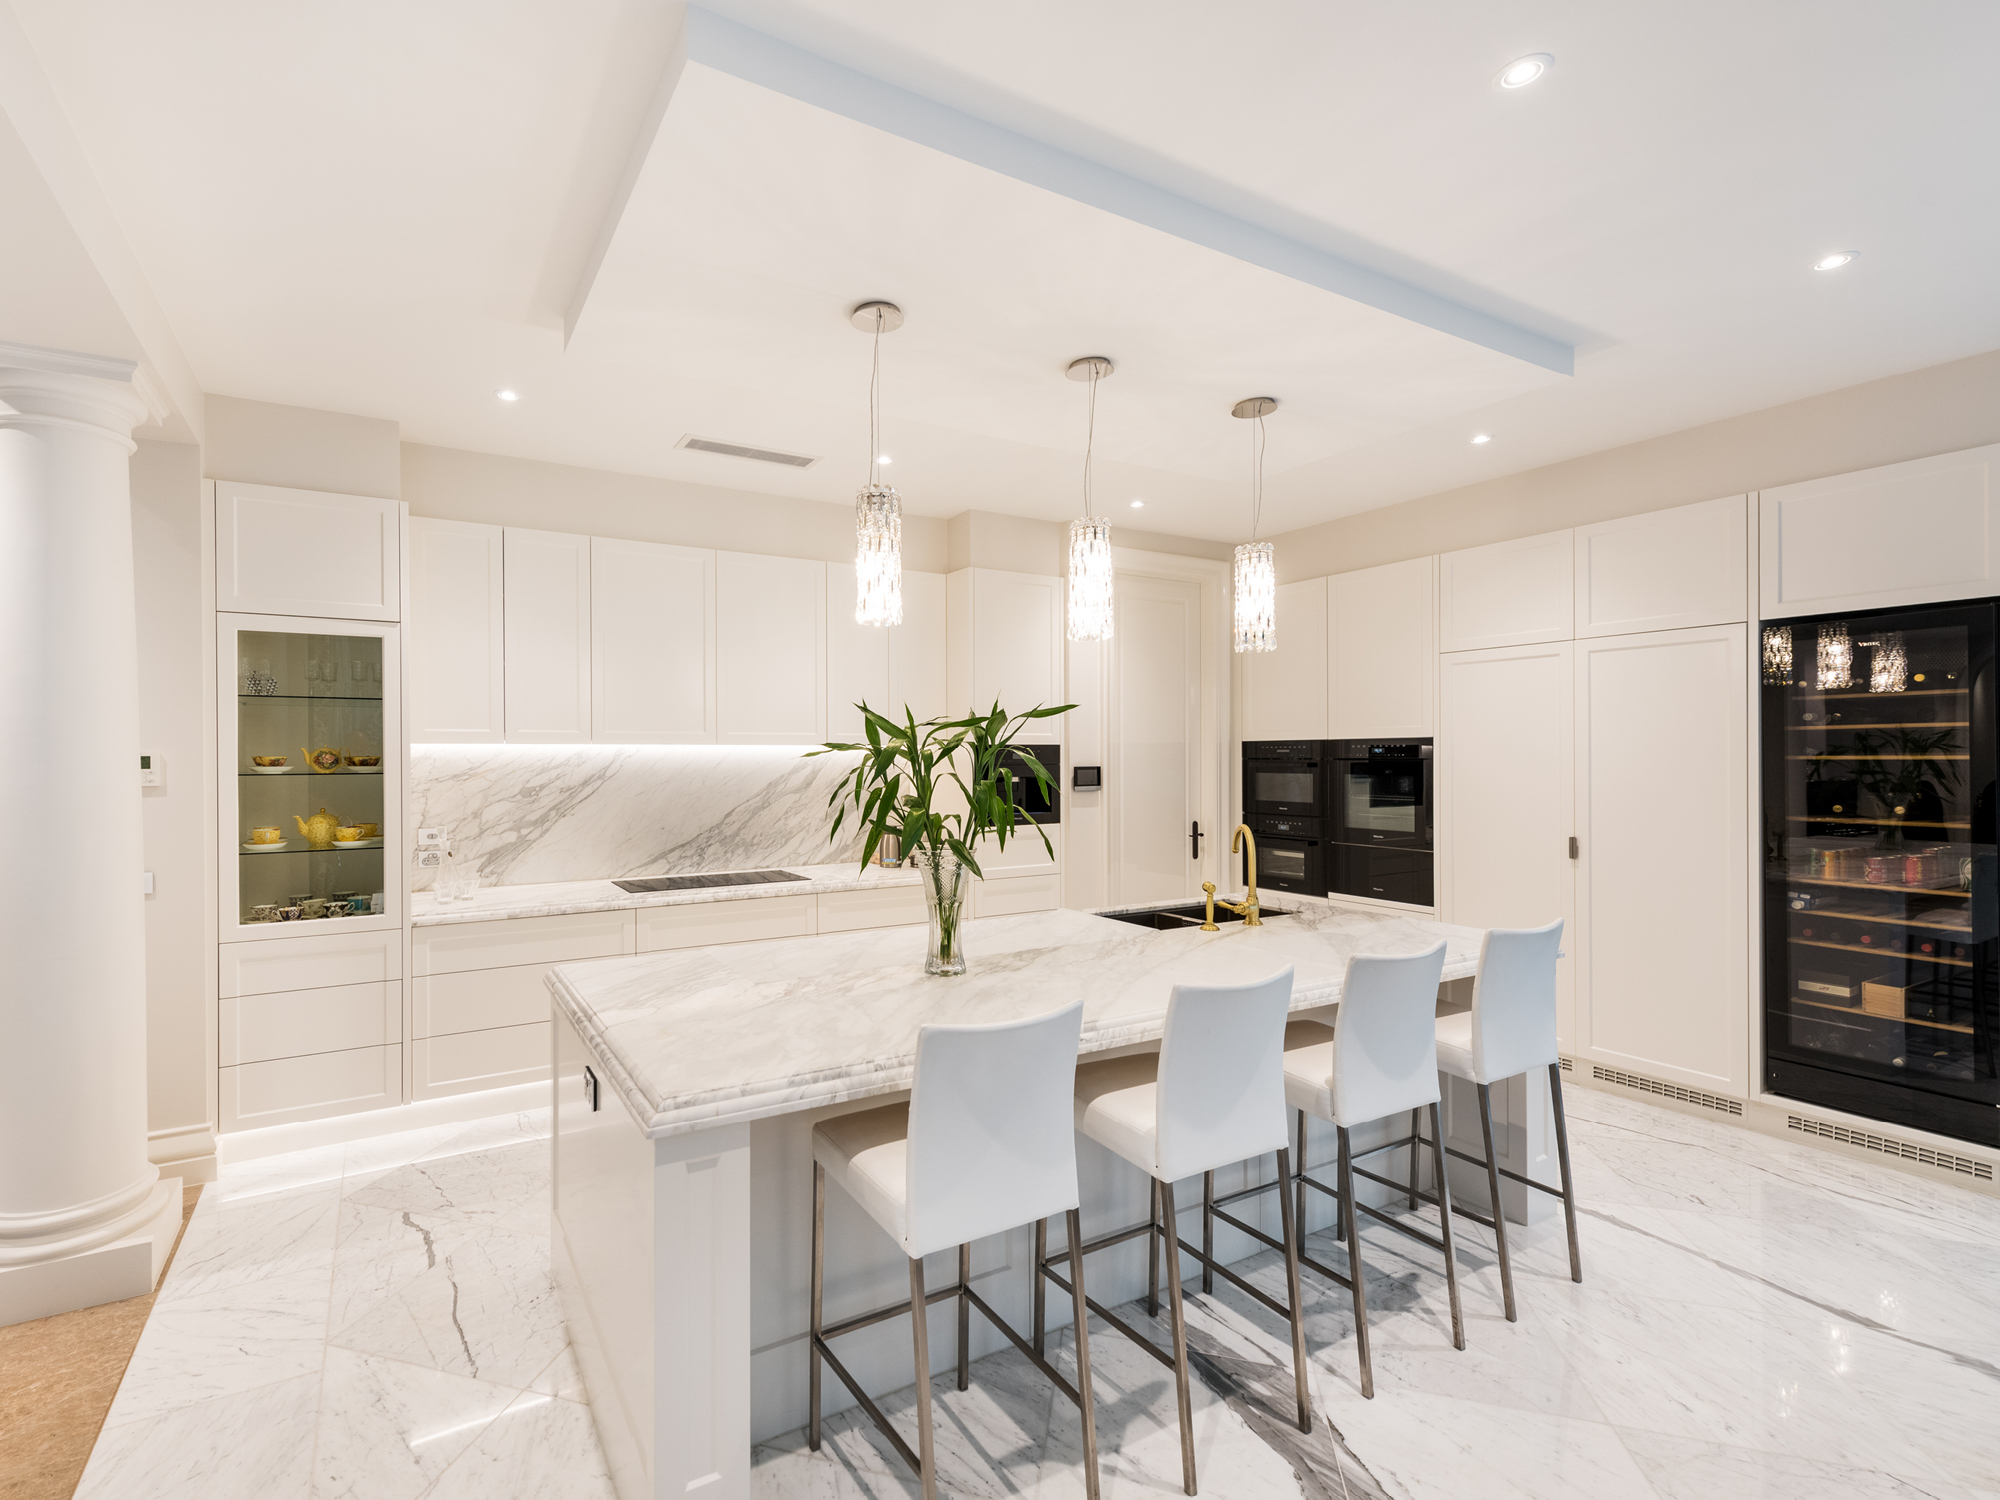 A Grand residence kitchen, with white stone floors and benches.